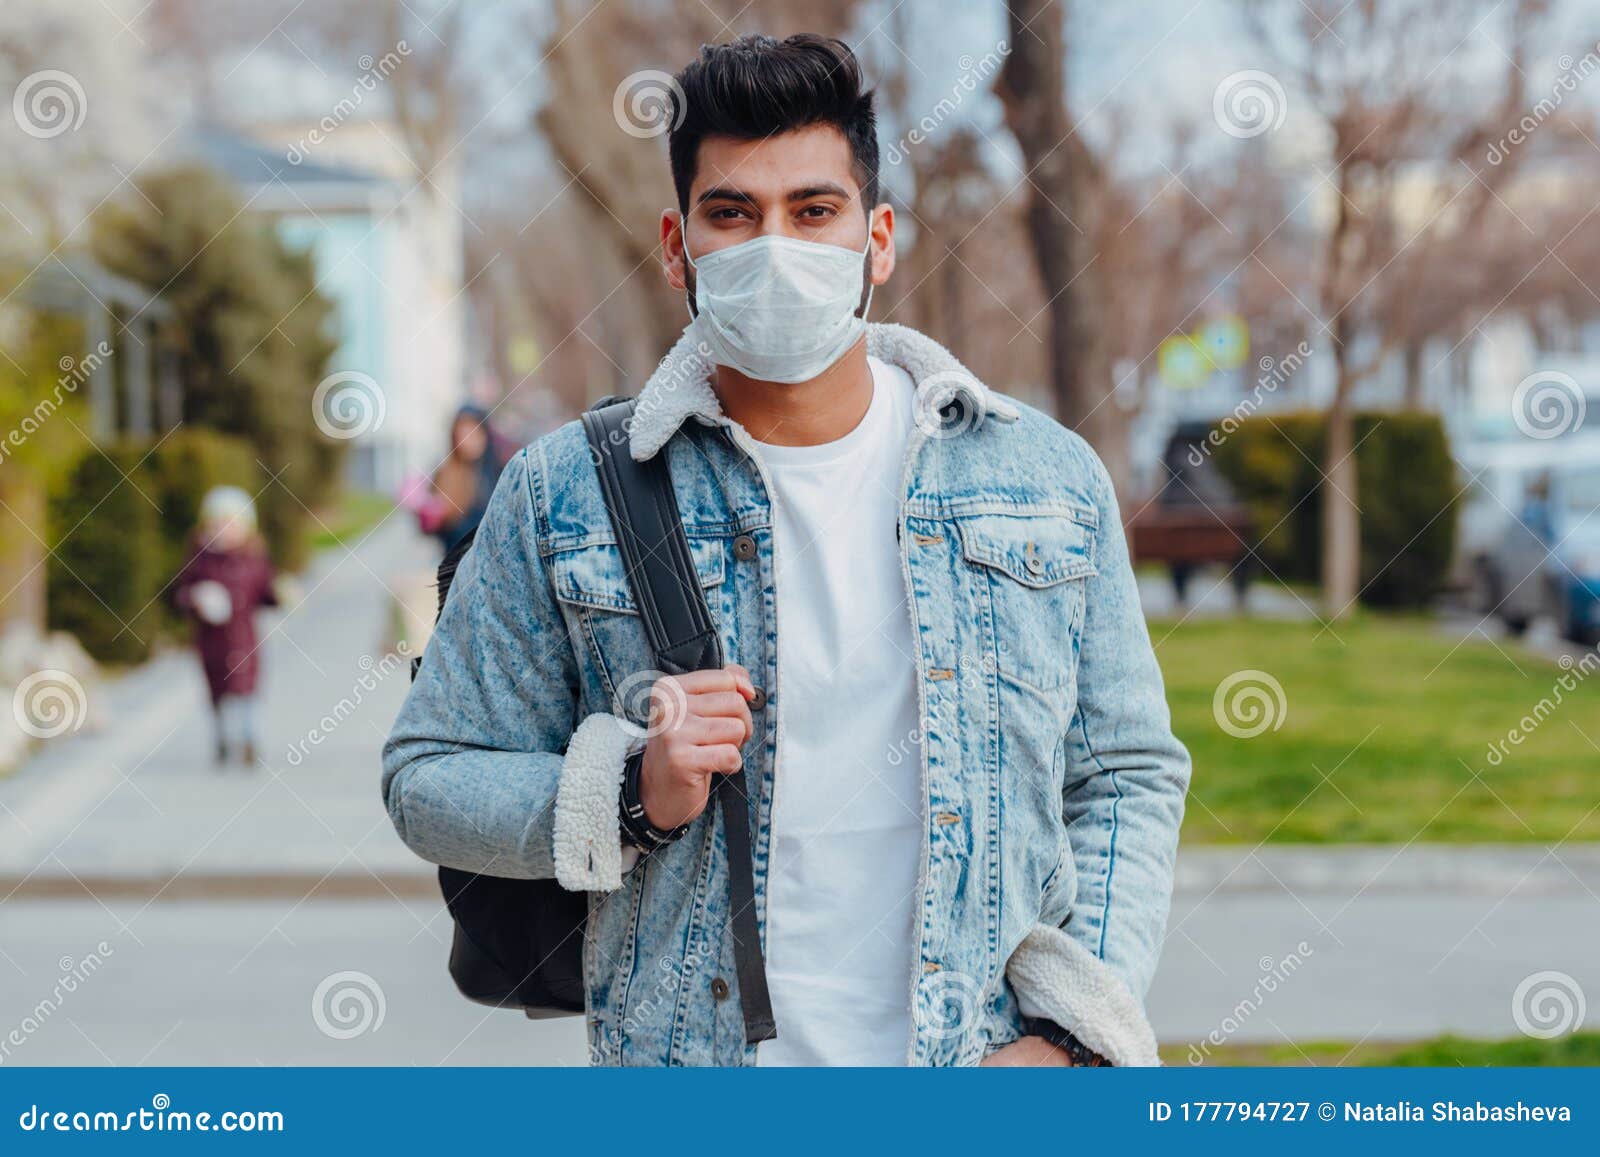 A Fashionably Dressed Young Indian Man in a Medical Mask Walks on the ...